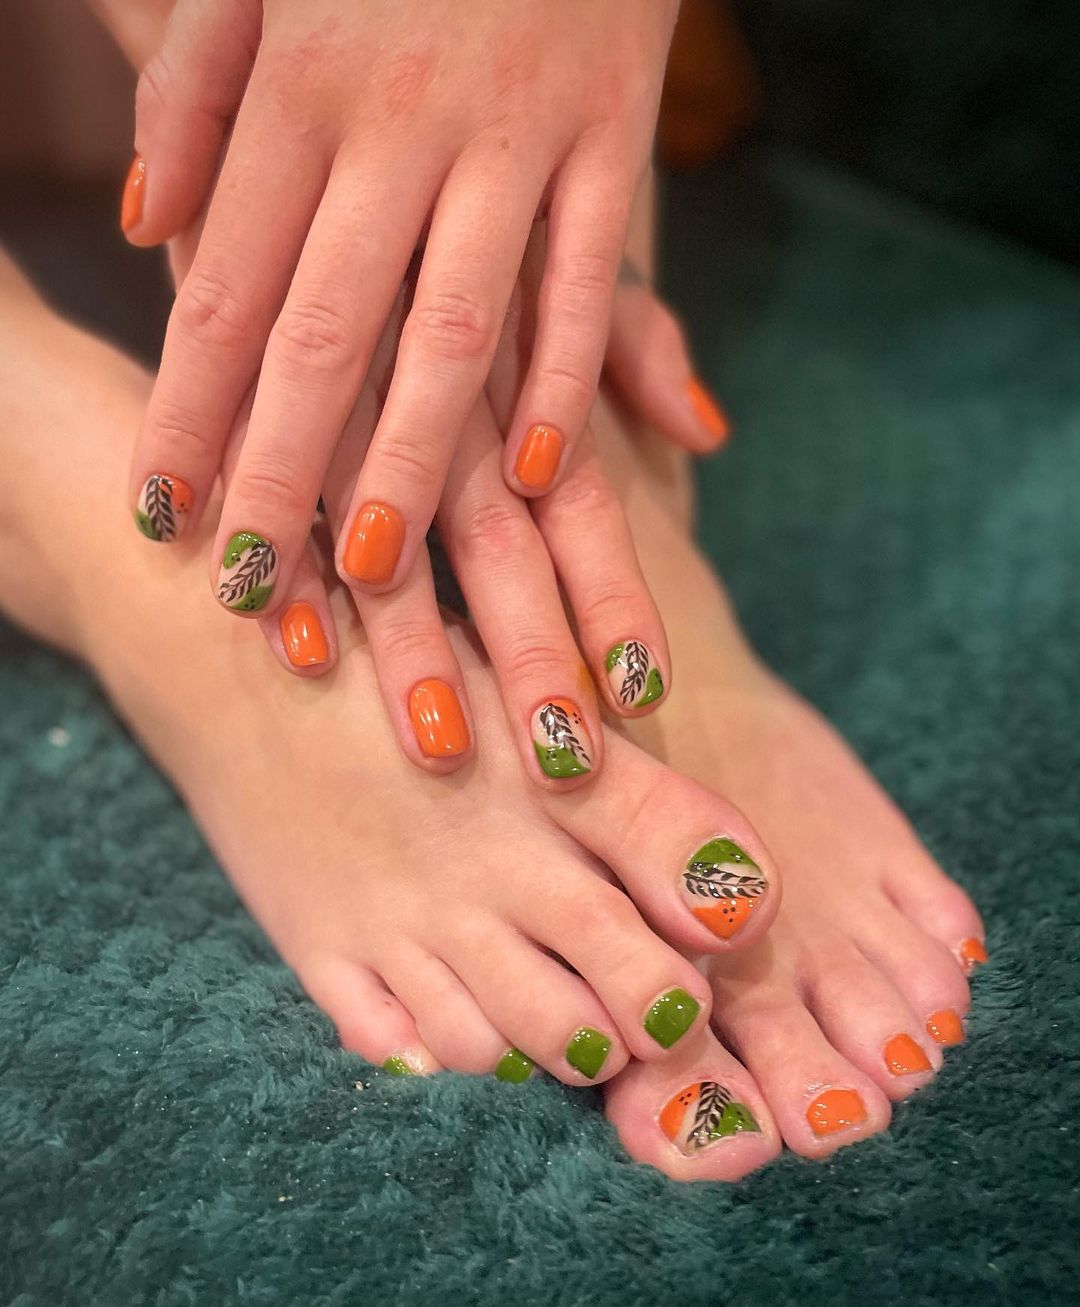 Summer Matching Coffin Nails and Toes